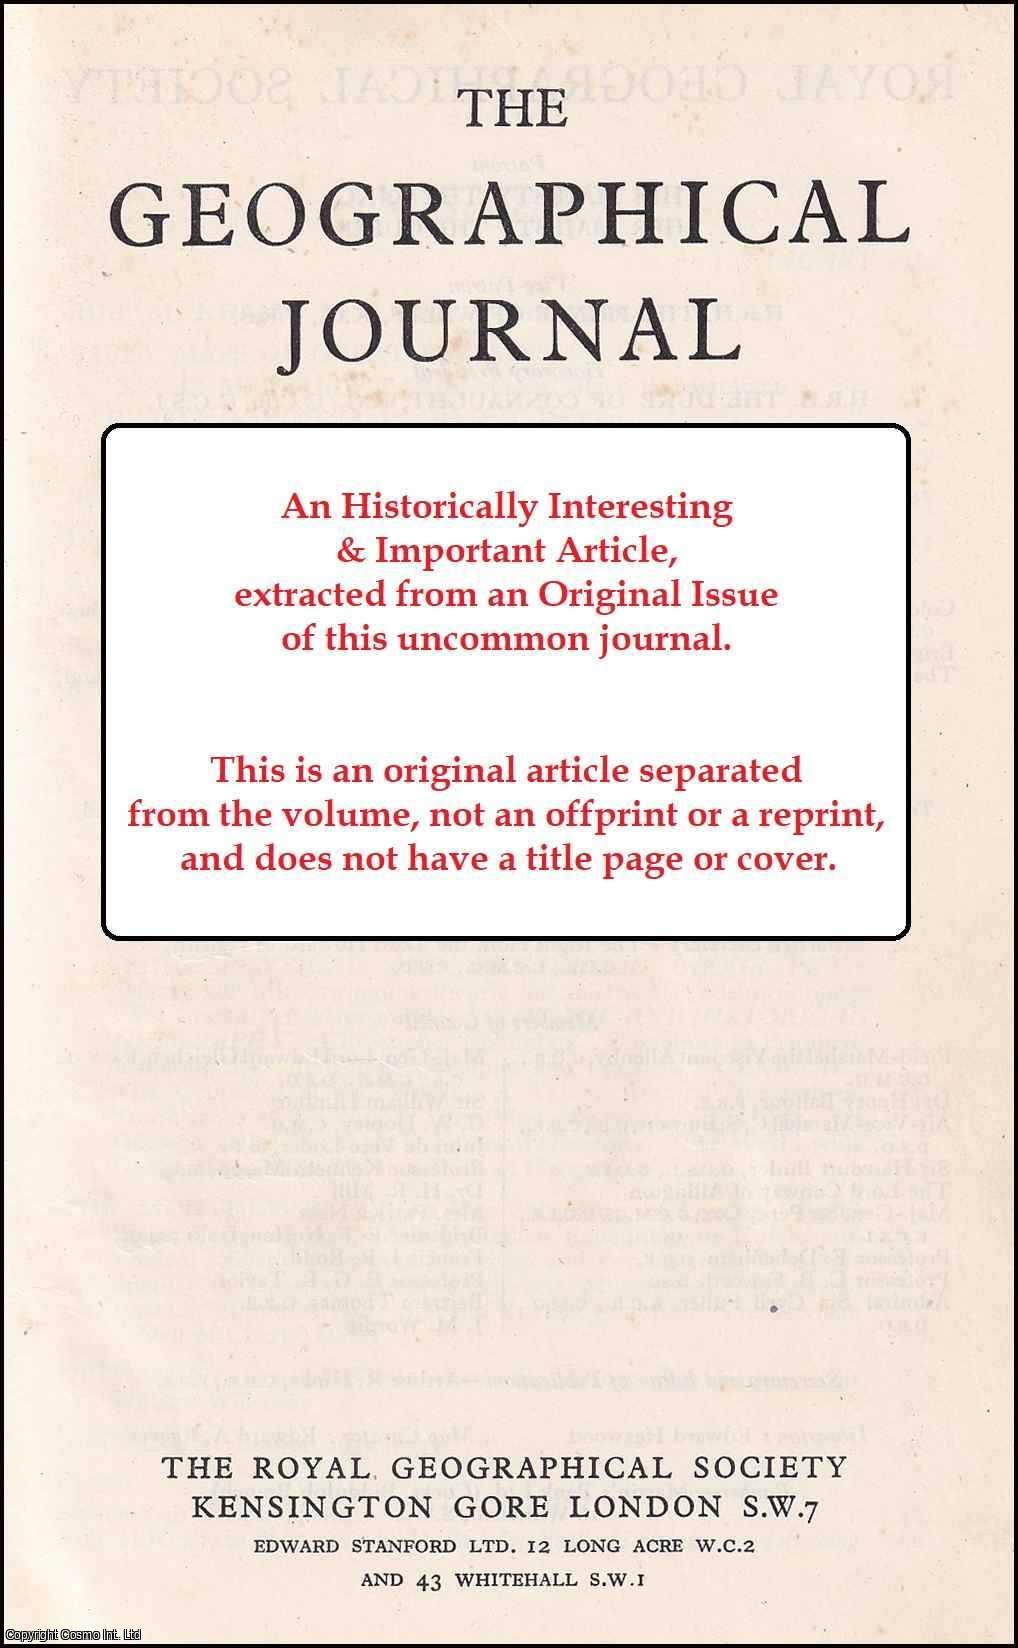 Michael Freeberne - Glacial Meltwater Resources in China. An original article from the Geographical Journal, 1965.